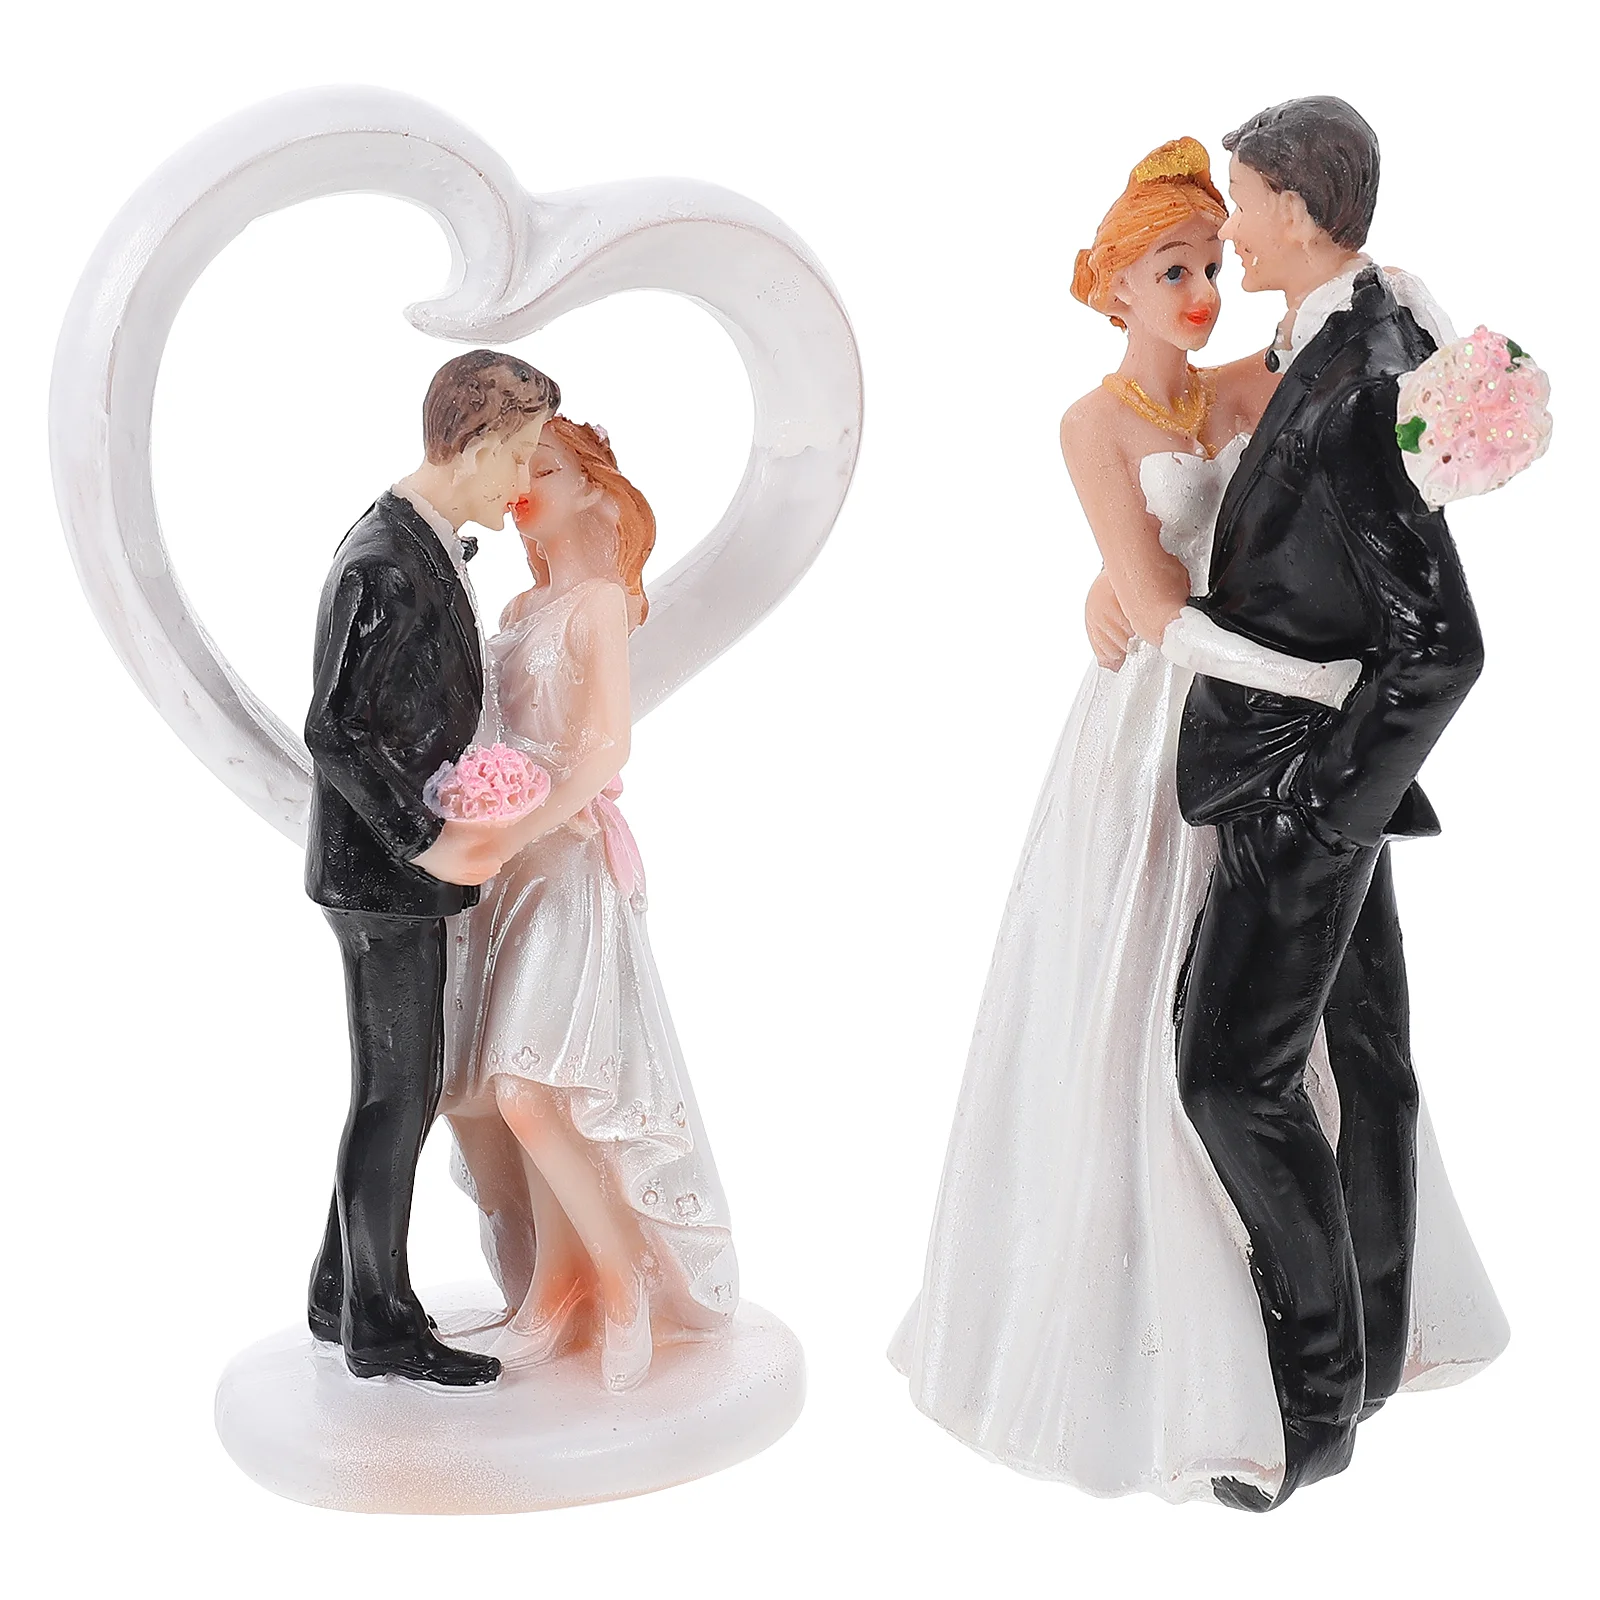 

2Pcs European Style Bride and Groom Cake Topper Wedding Figurines Valentine's Day Decors